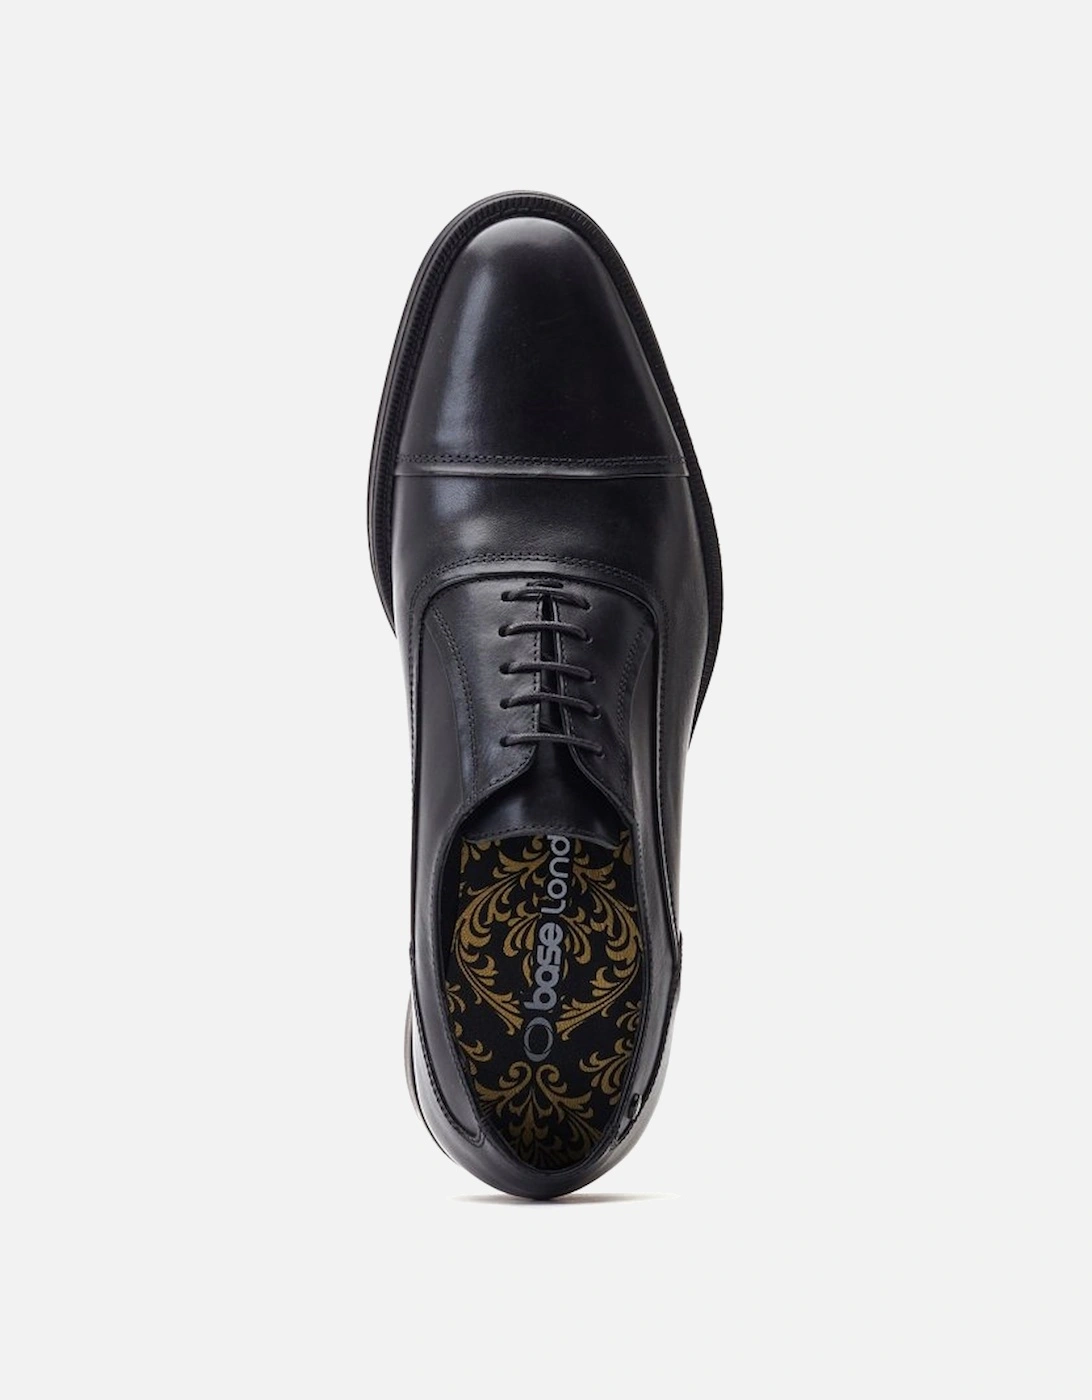 Wilson Waxy Mens Oxford Shoes